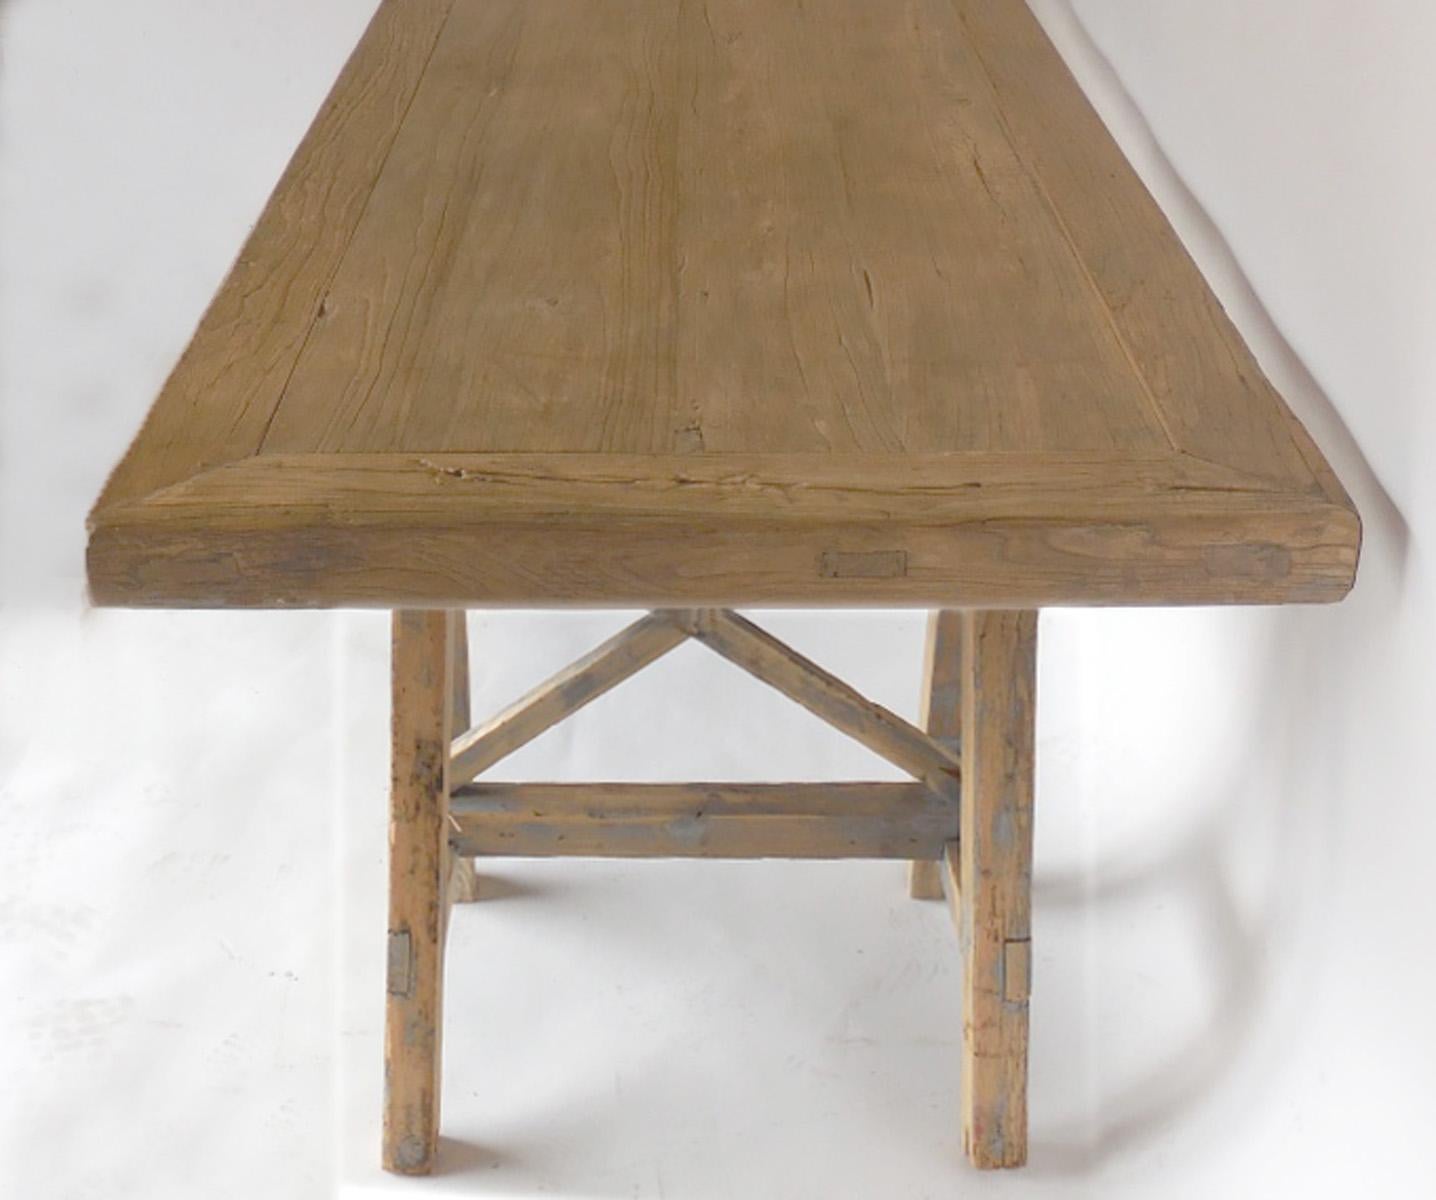 Rustic Japanese Elm Wood Saw Horse Table